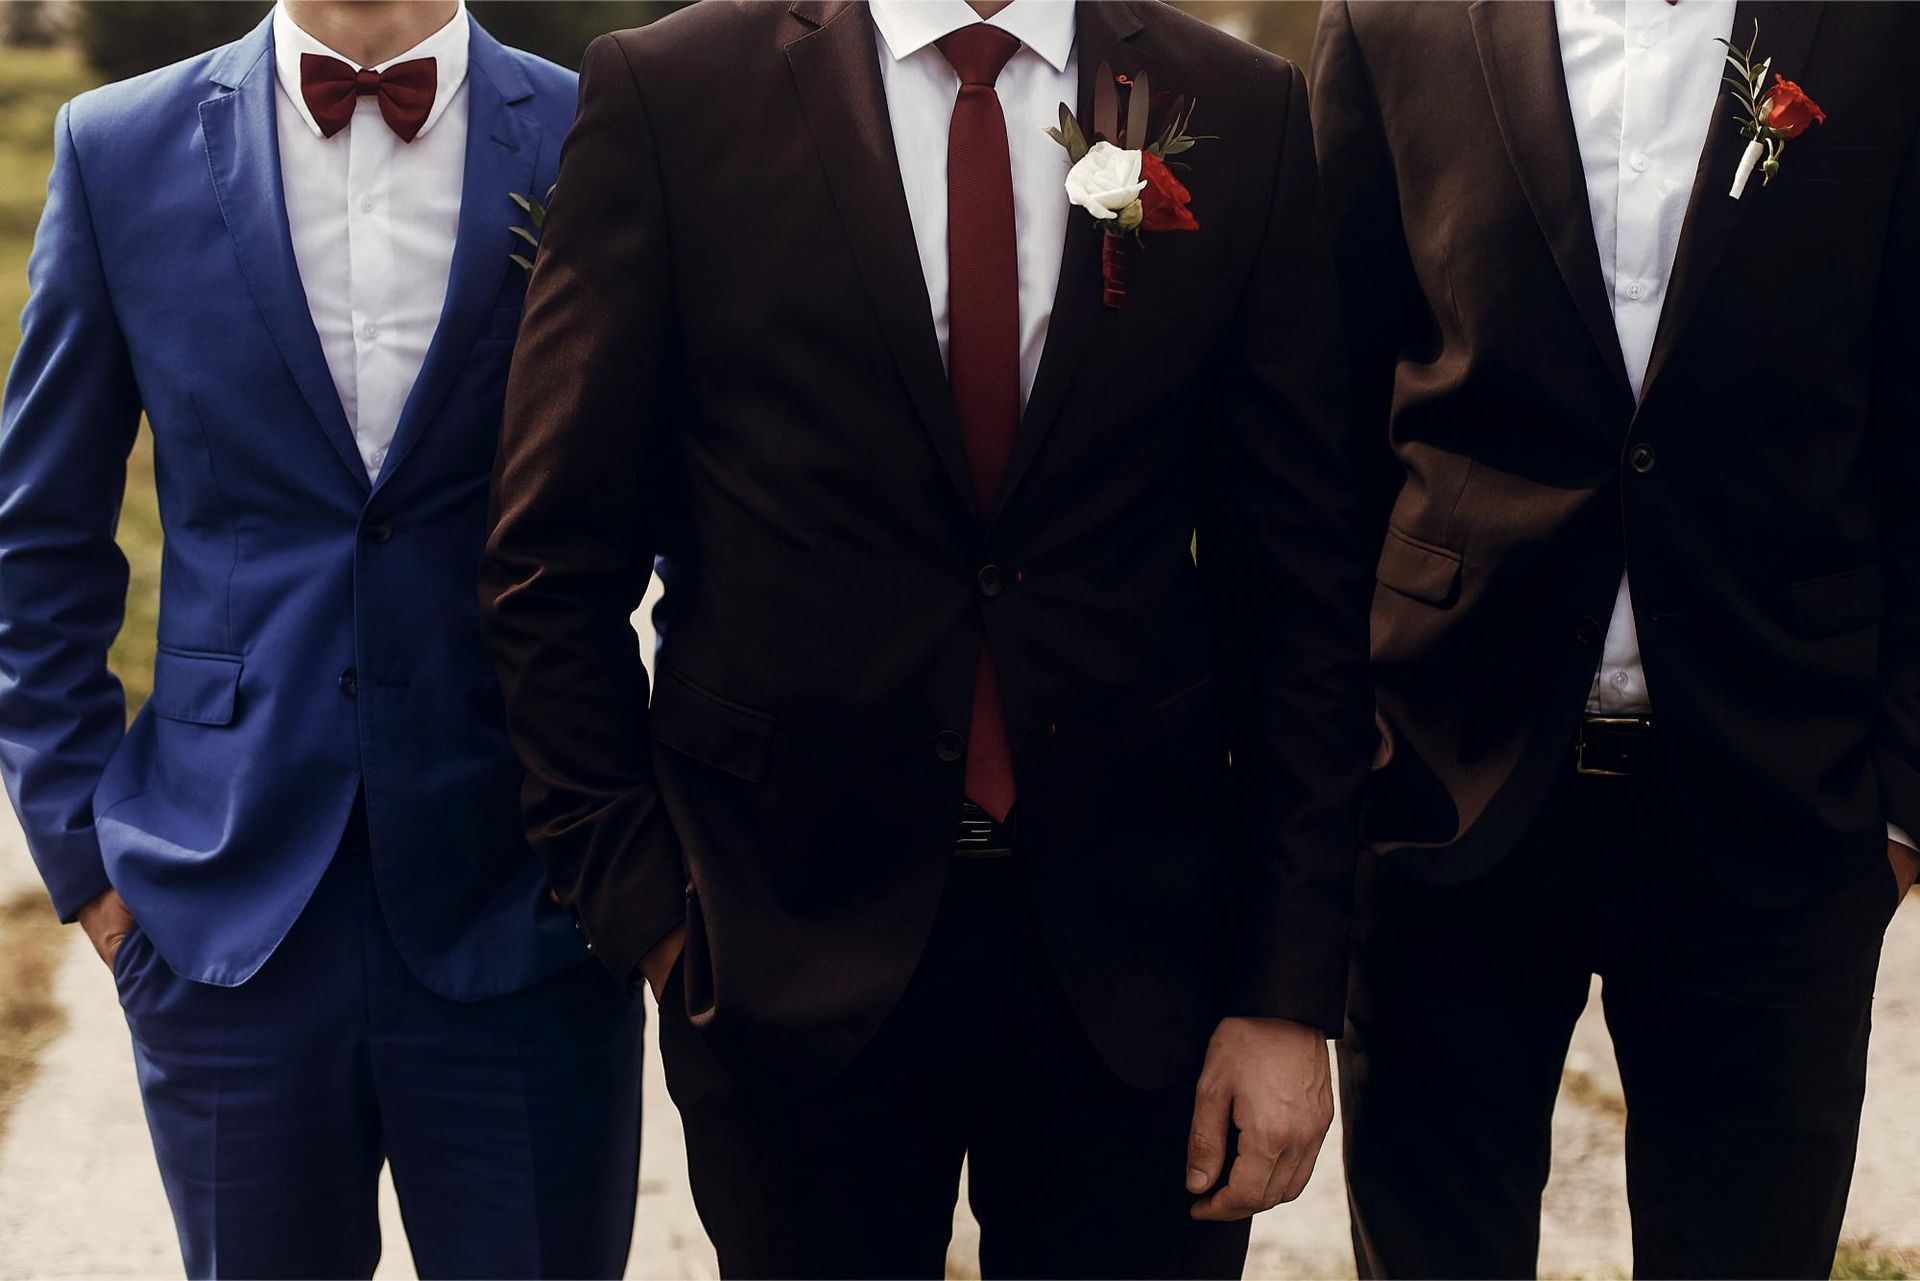 three men in suits and ties are standing next to each other